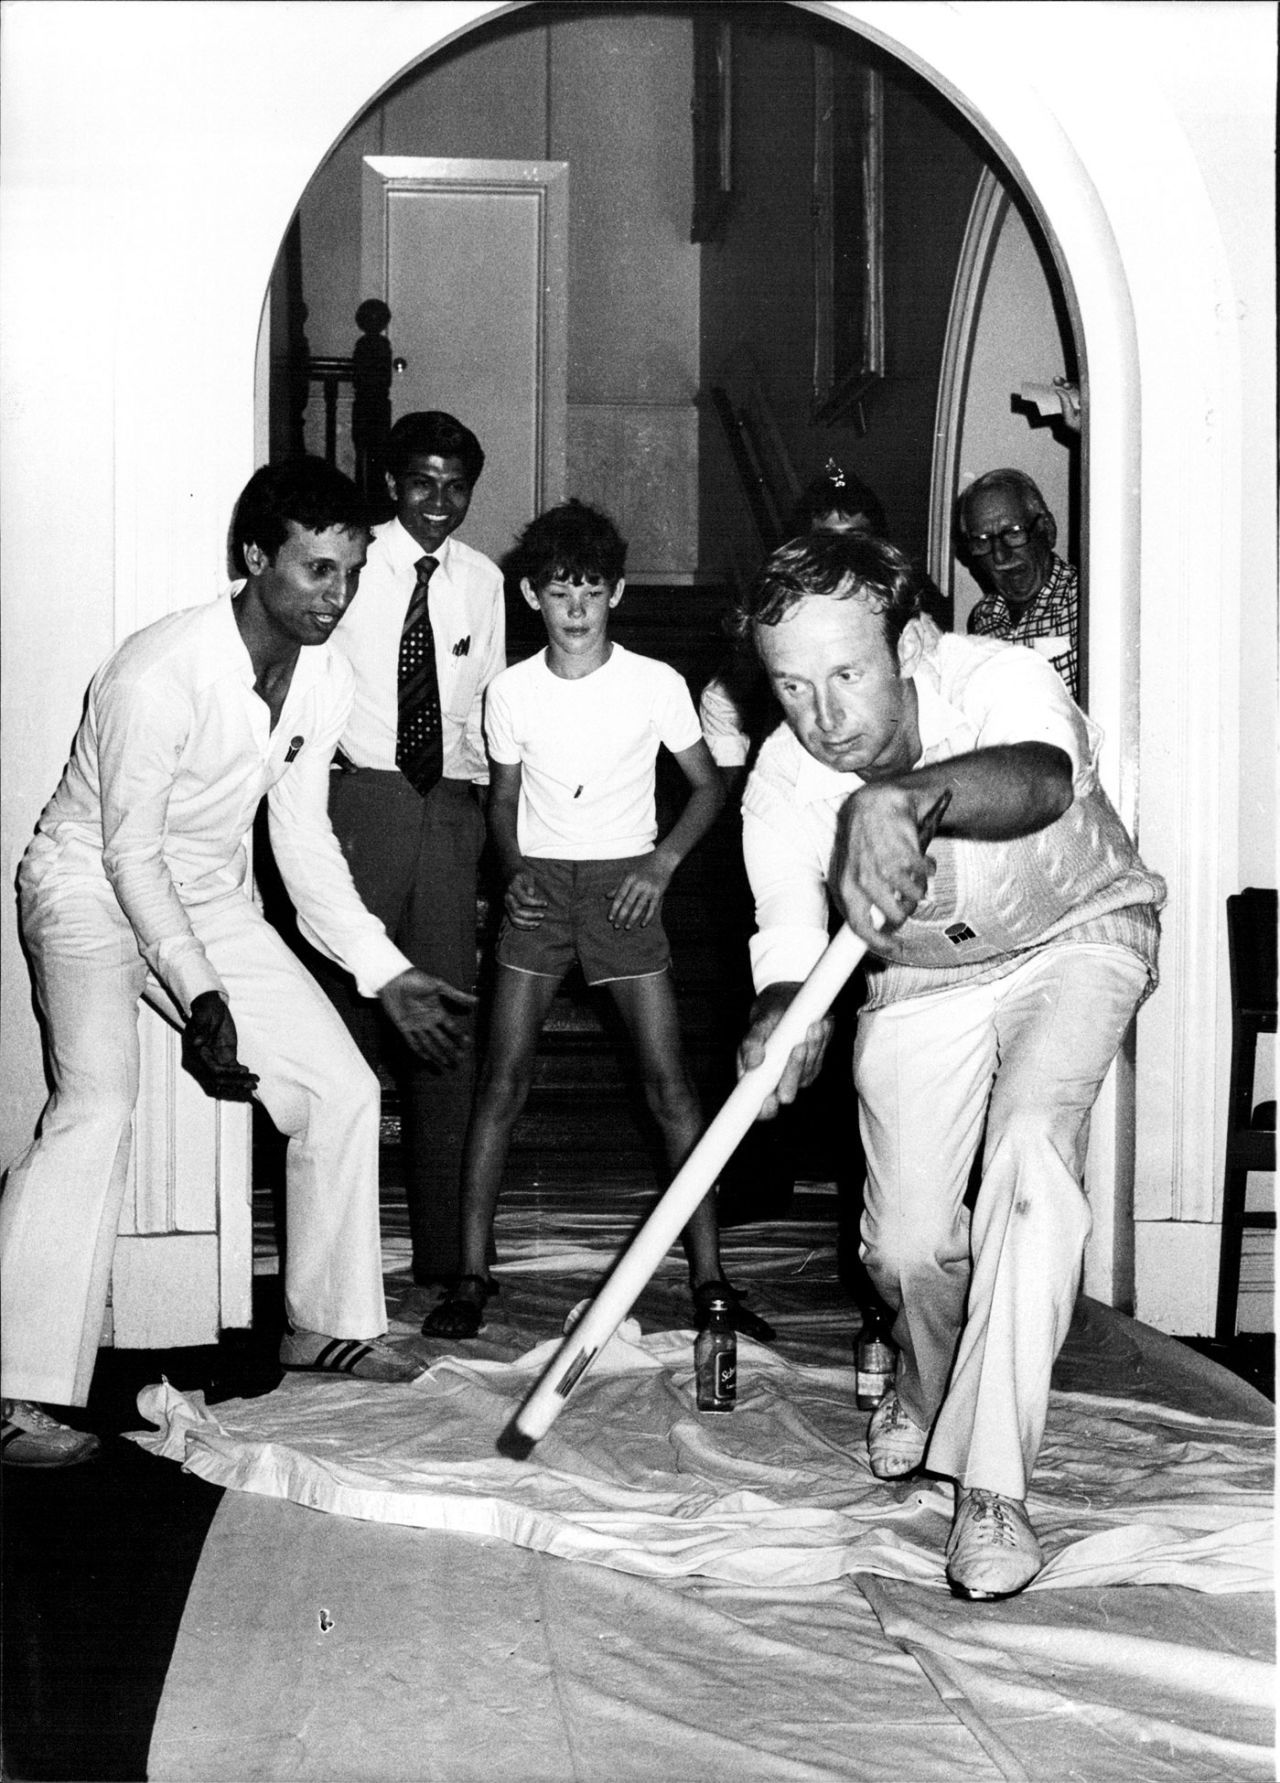 Derek Underwood bats while Asif Iqbal fields at slip and a young James Packer keeps wicket in a game of corridor cricket during a rain delay, WSC Australia v WSC World XI, 3rd day, World Series Cricket, Sydney, January 16, 1978